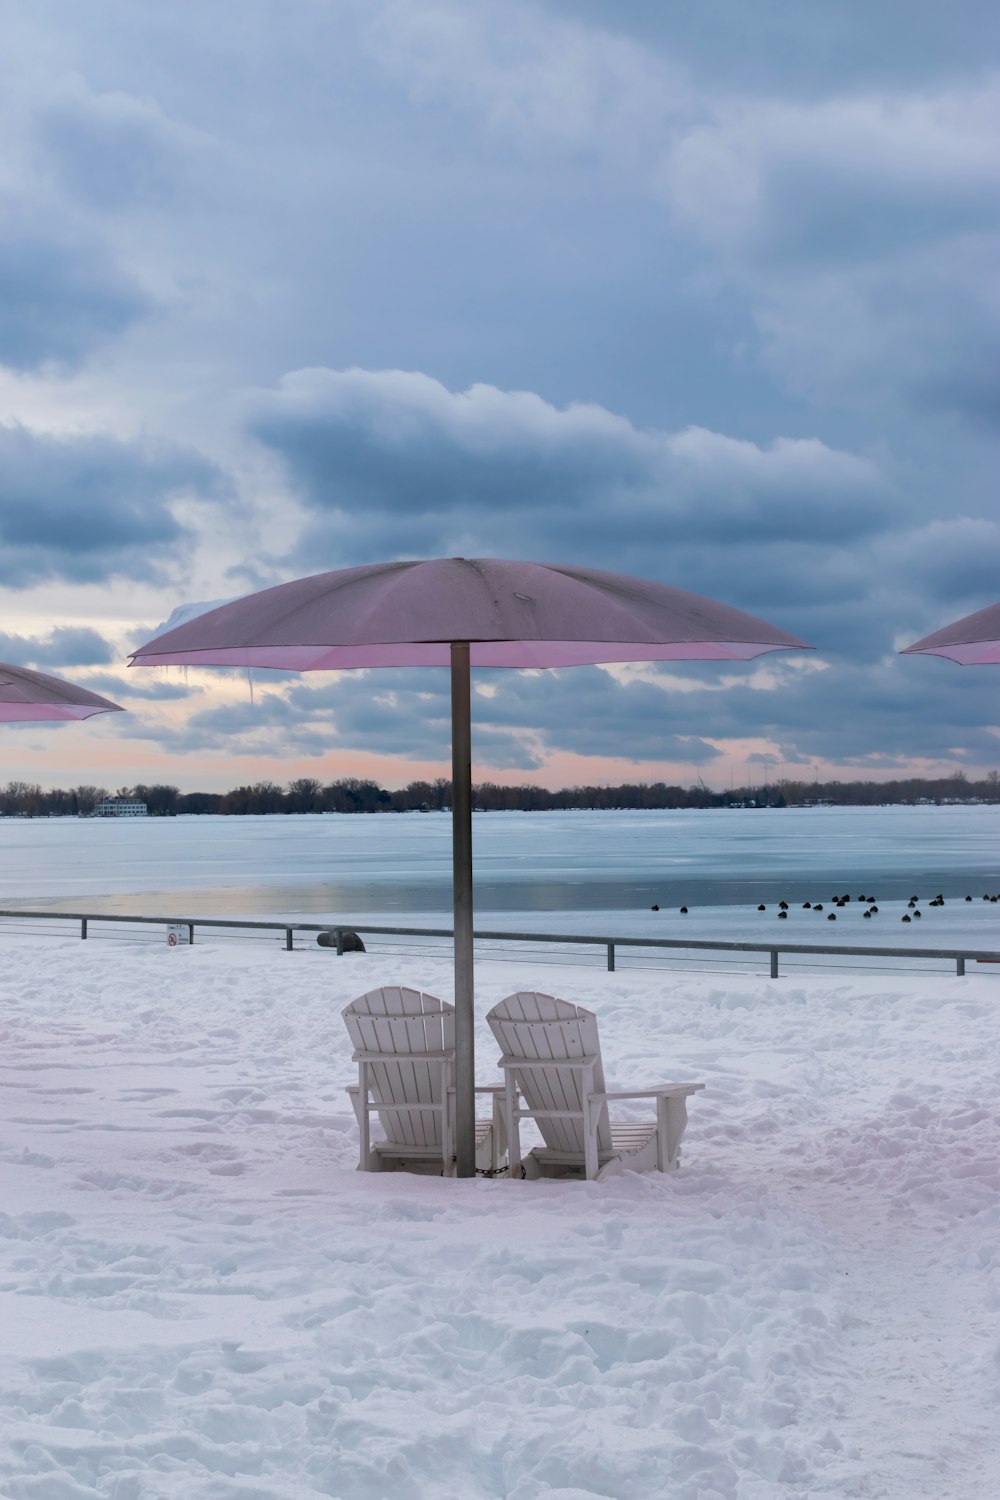 a couple of chairs sitting under umbrellas in the snow